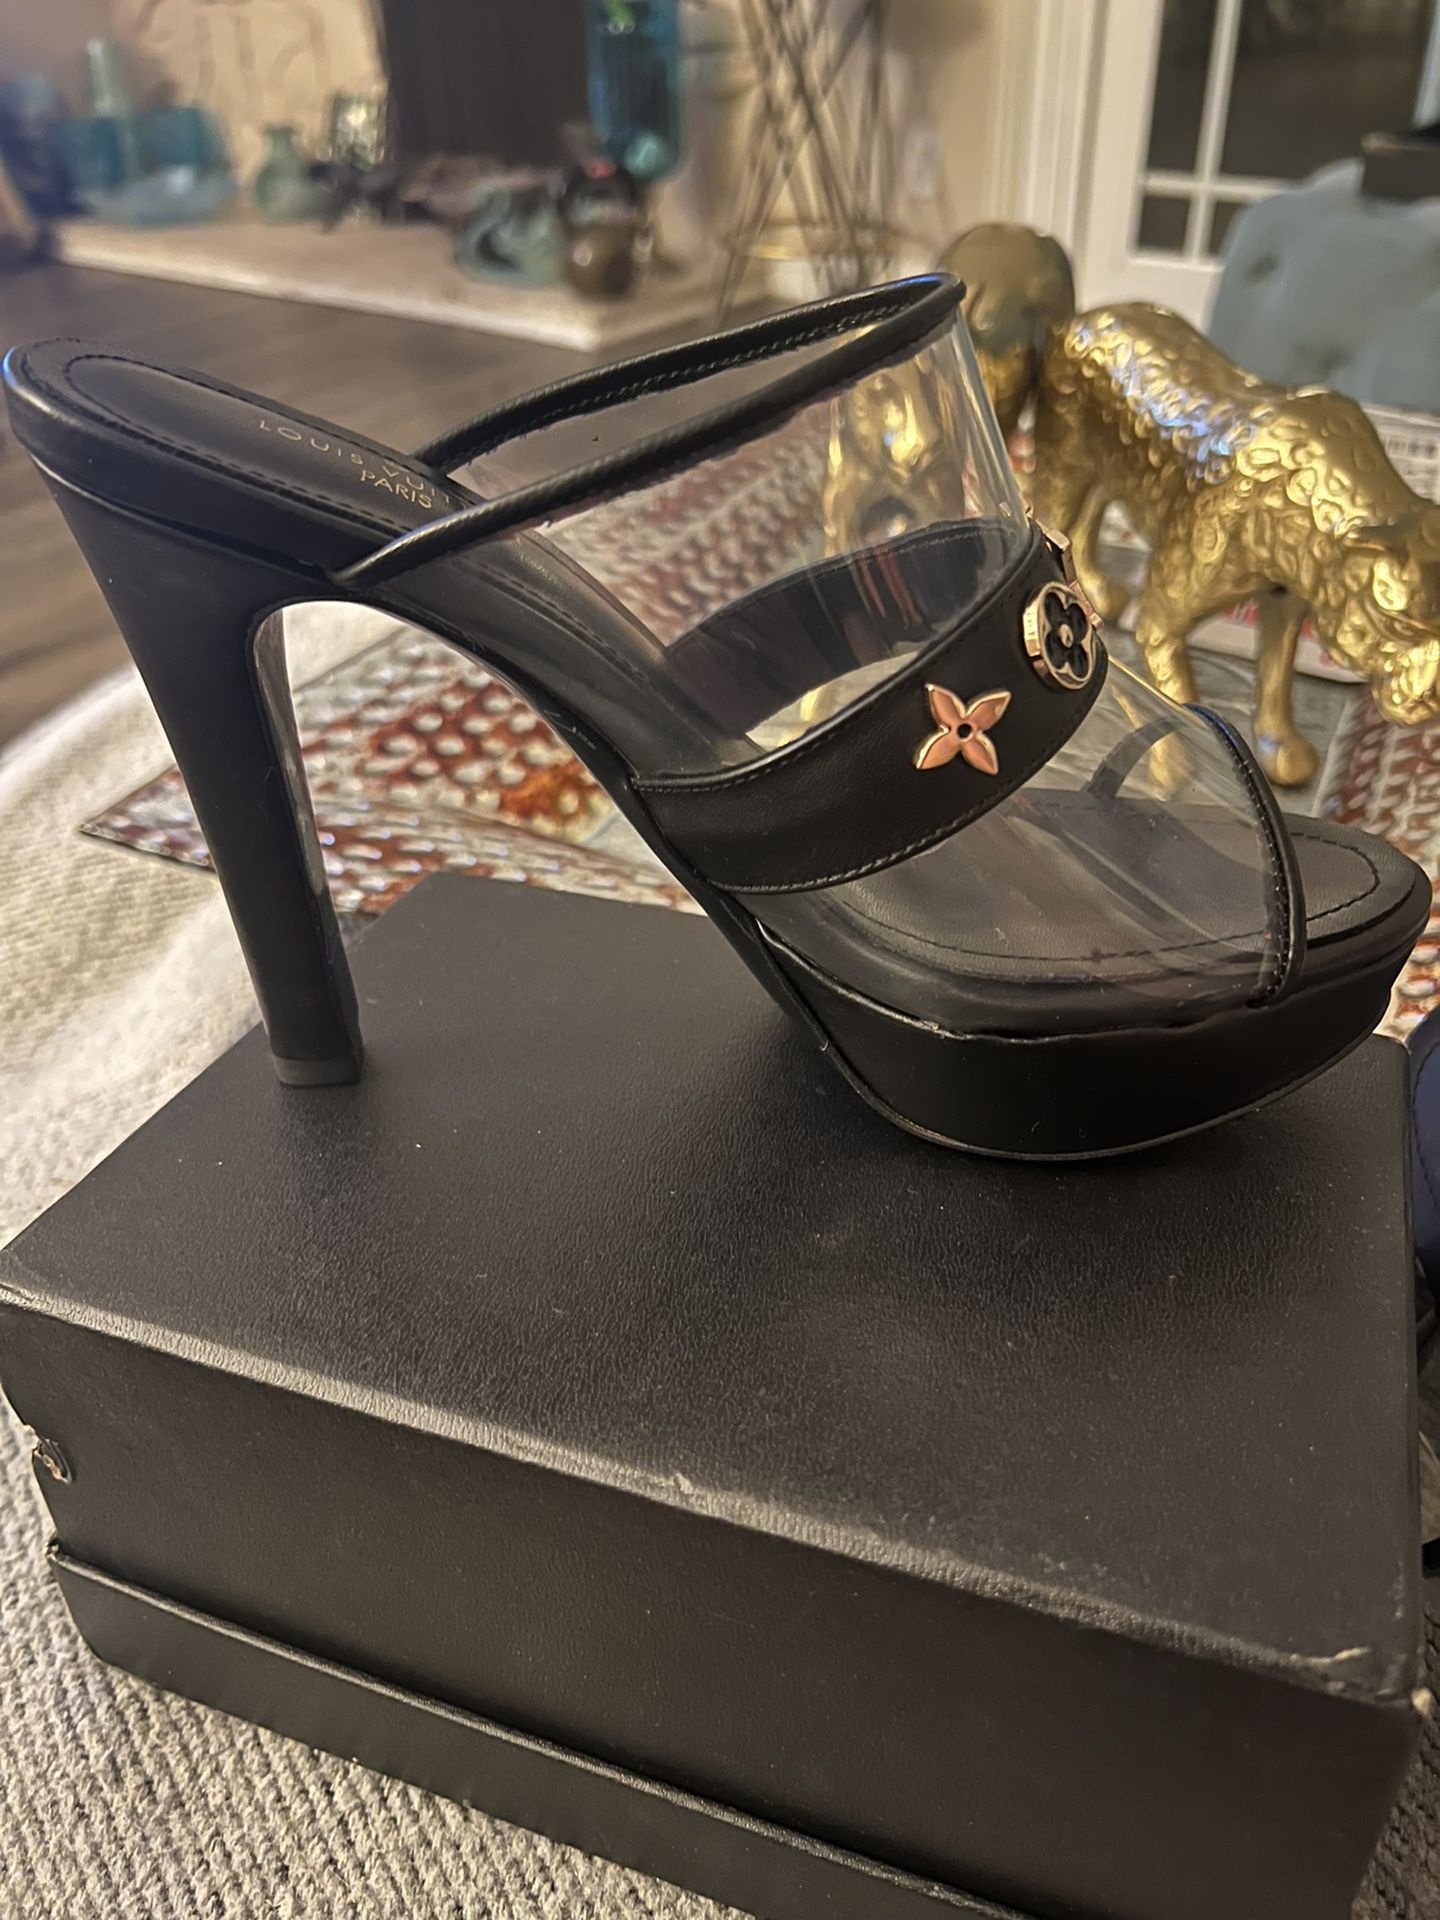 Louis Vuitton Heels Size 8 for Sale in Los Angeles, CA - OfferUp